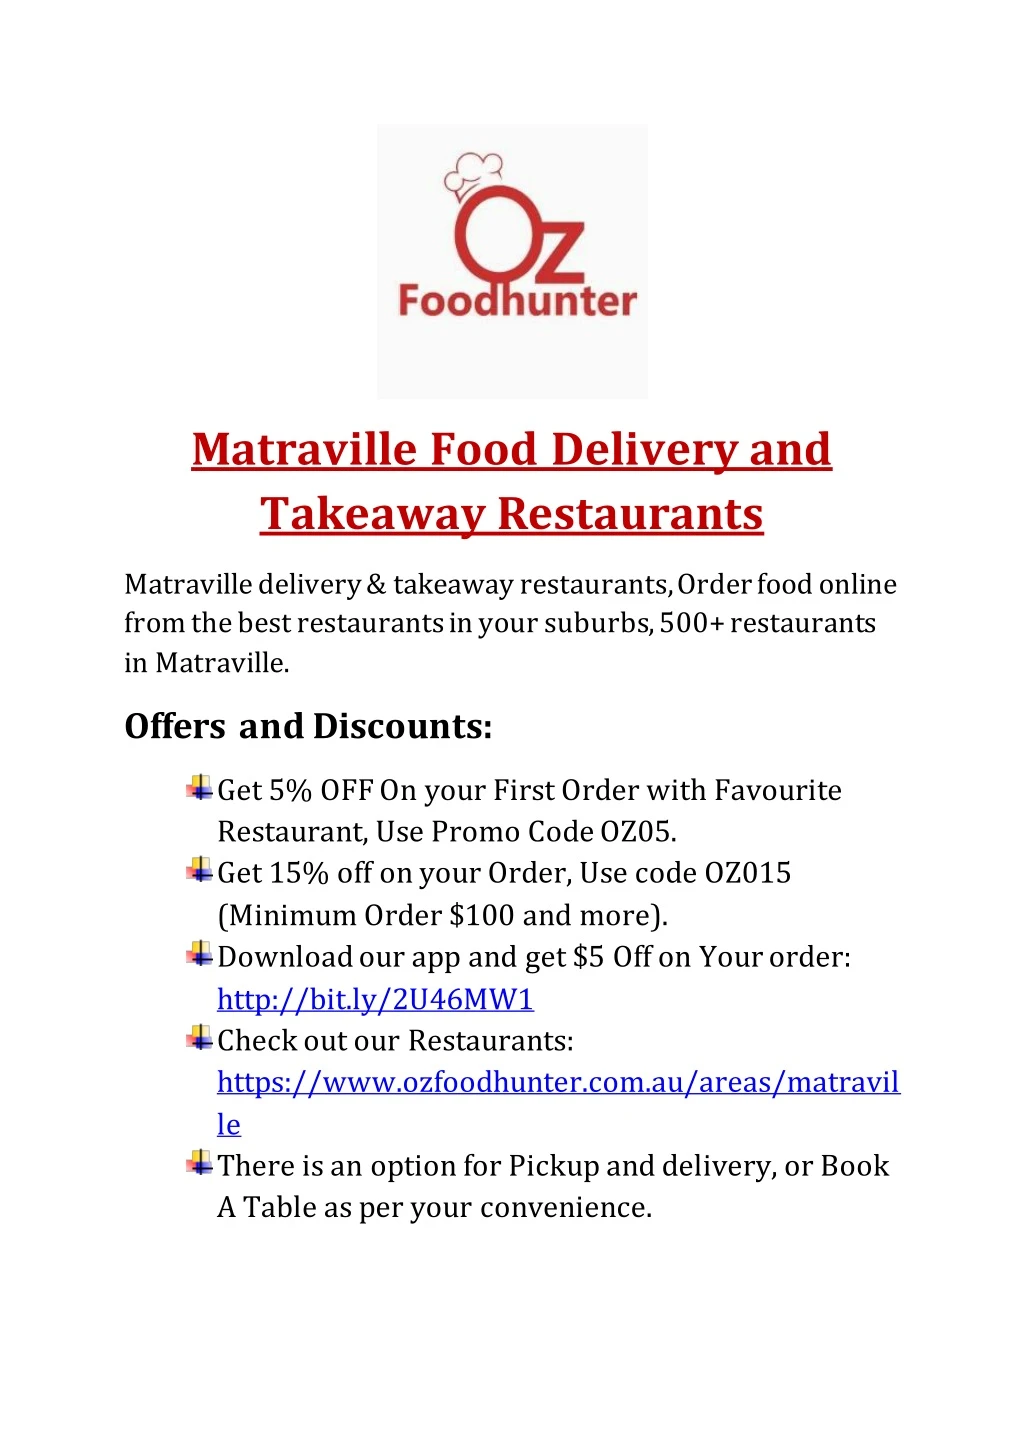 matraville food delivery and takeaway restaurants